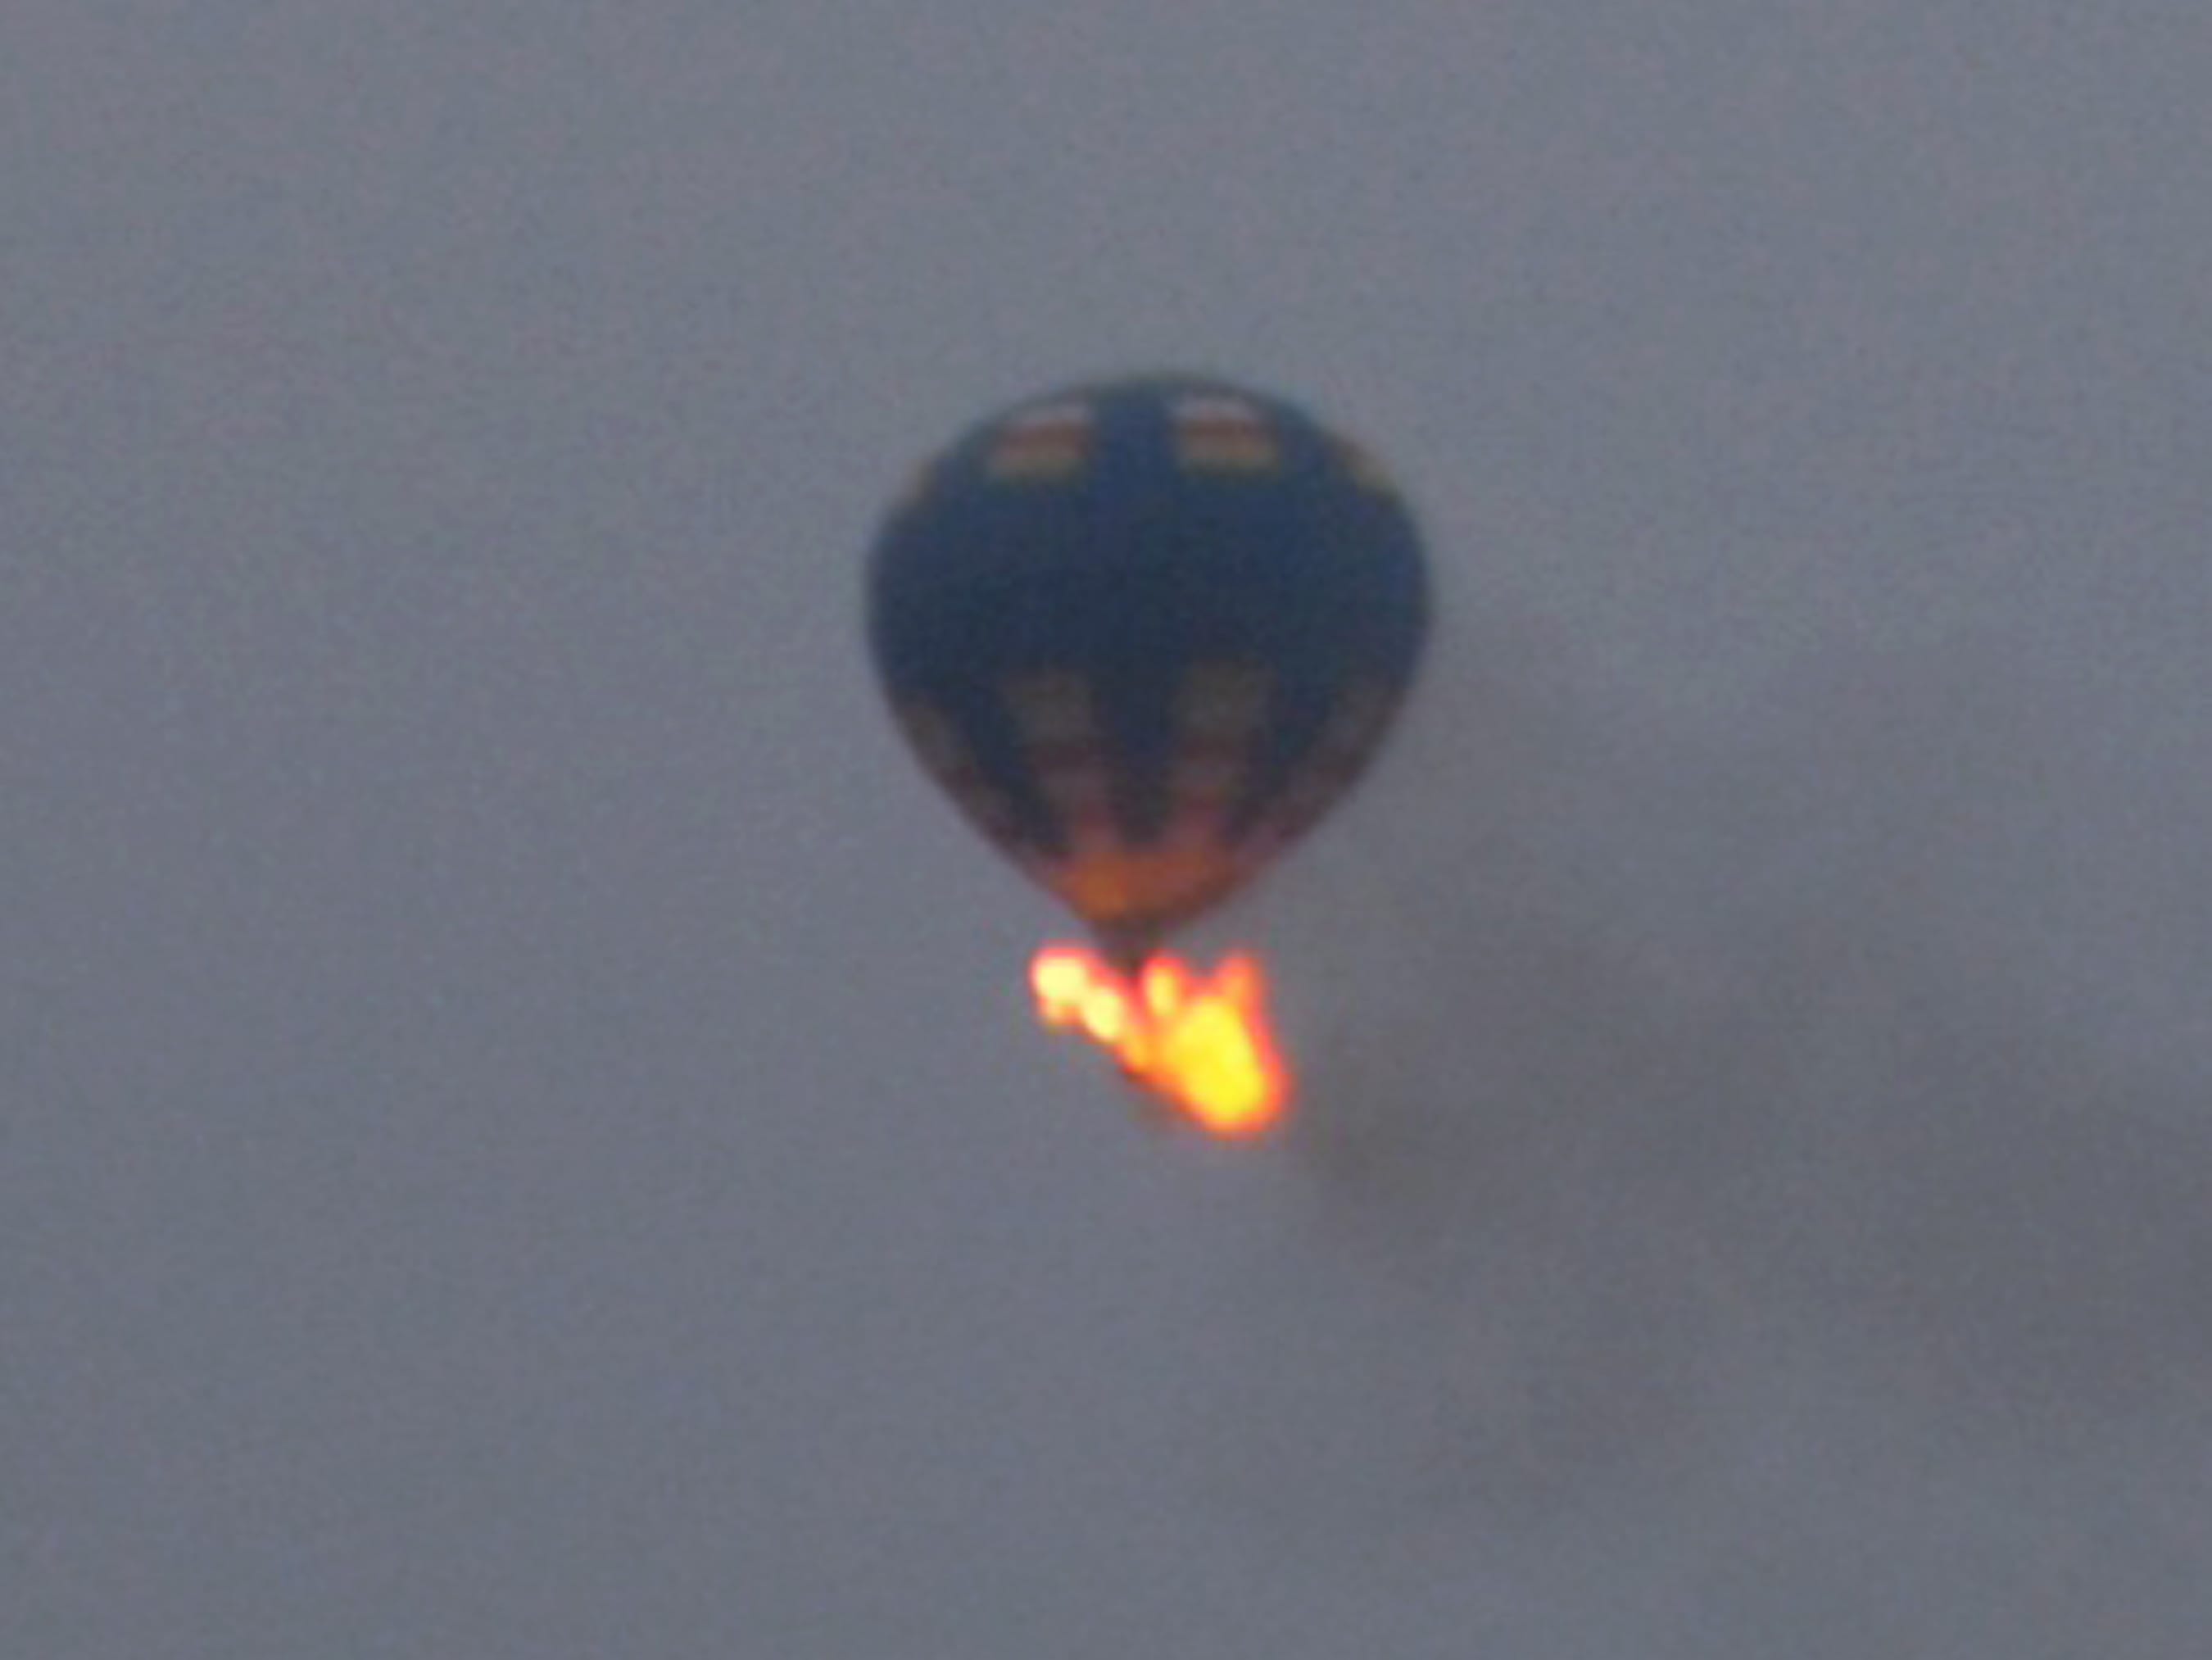 This photo provided by Nancy Johnson shows what authorities say is a hot-air balloon that wass believed to have caught fire and crashed in Virginia on Friday. Virginia State Police received calls of the crash shortly before 8 p.m., police spokeswoman Corinne Geller told a news conference.